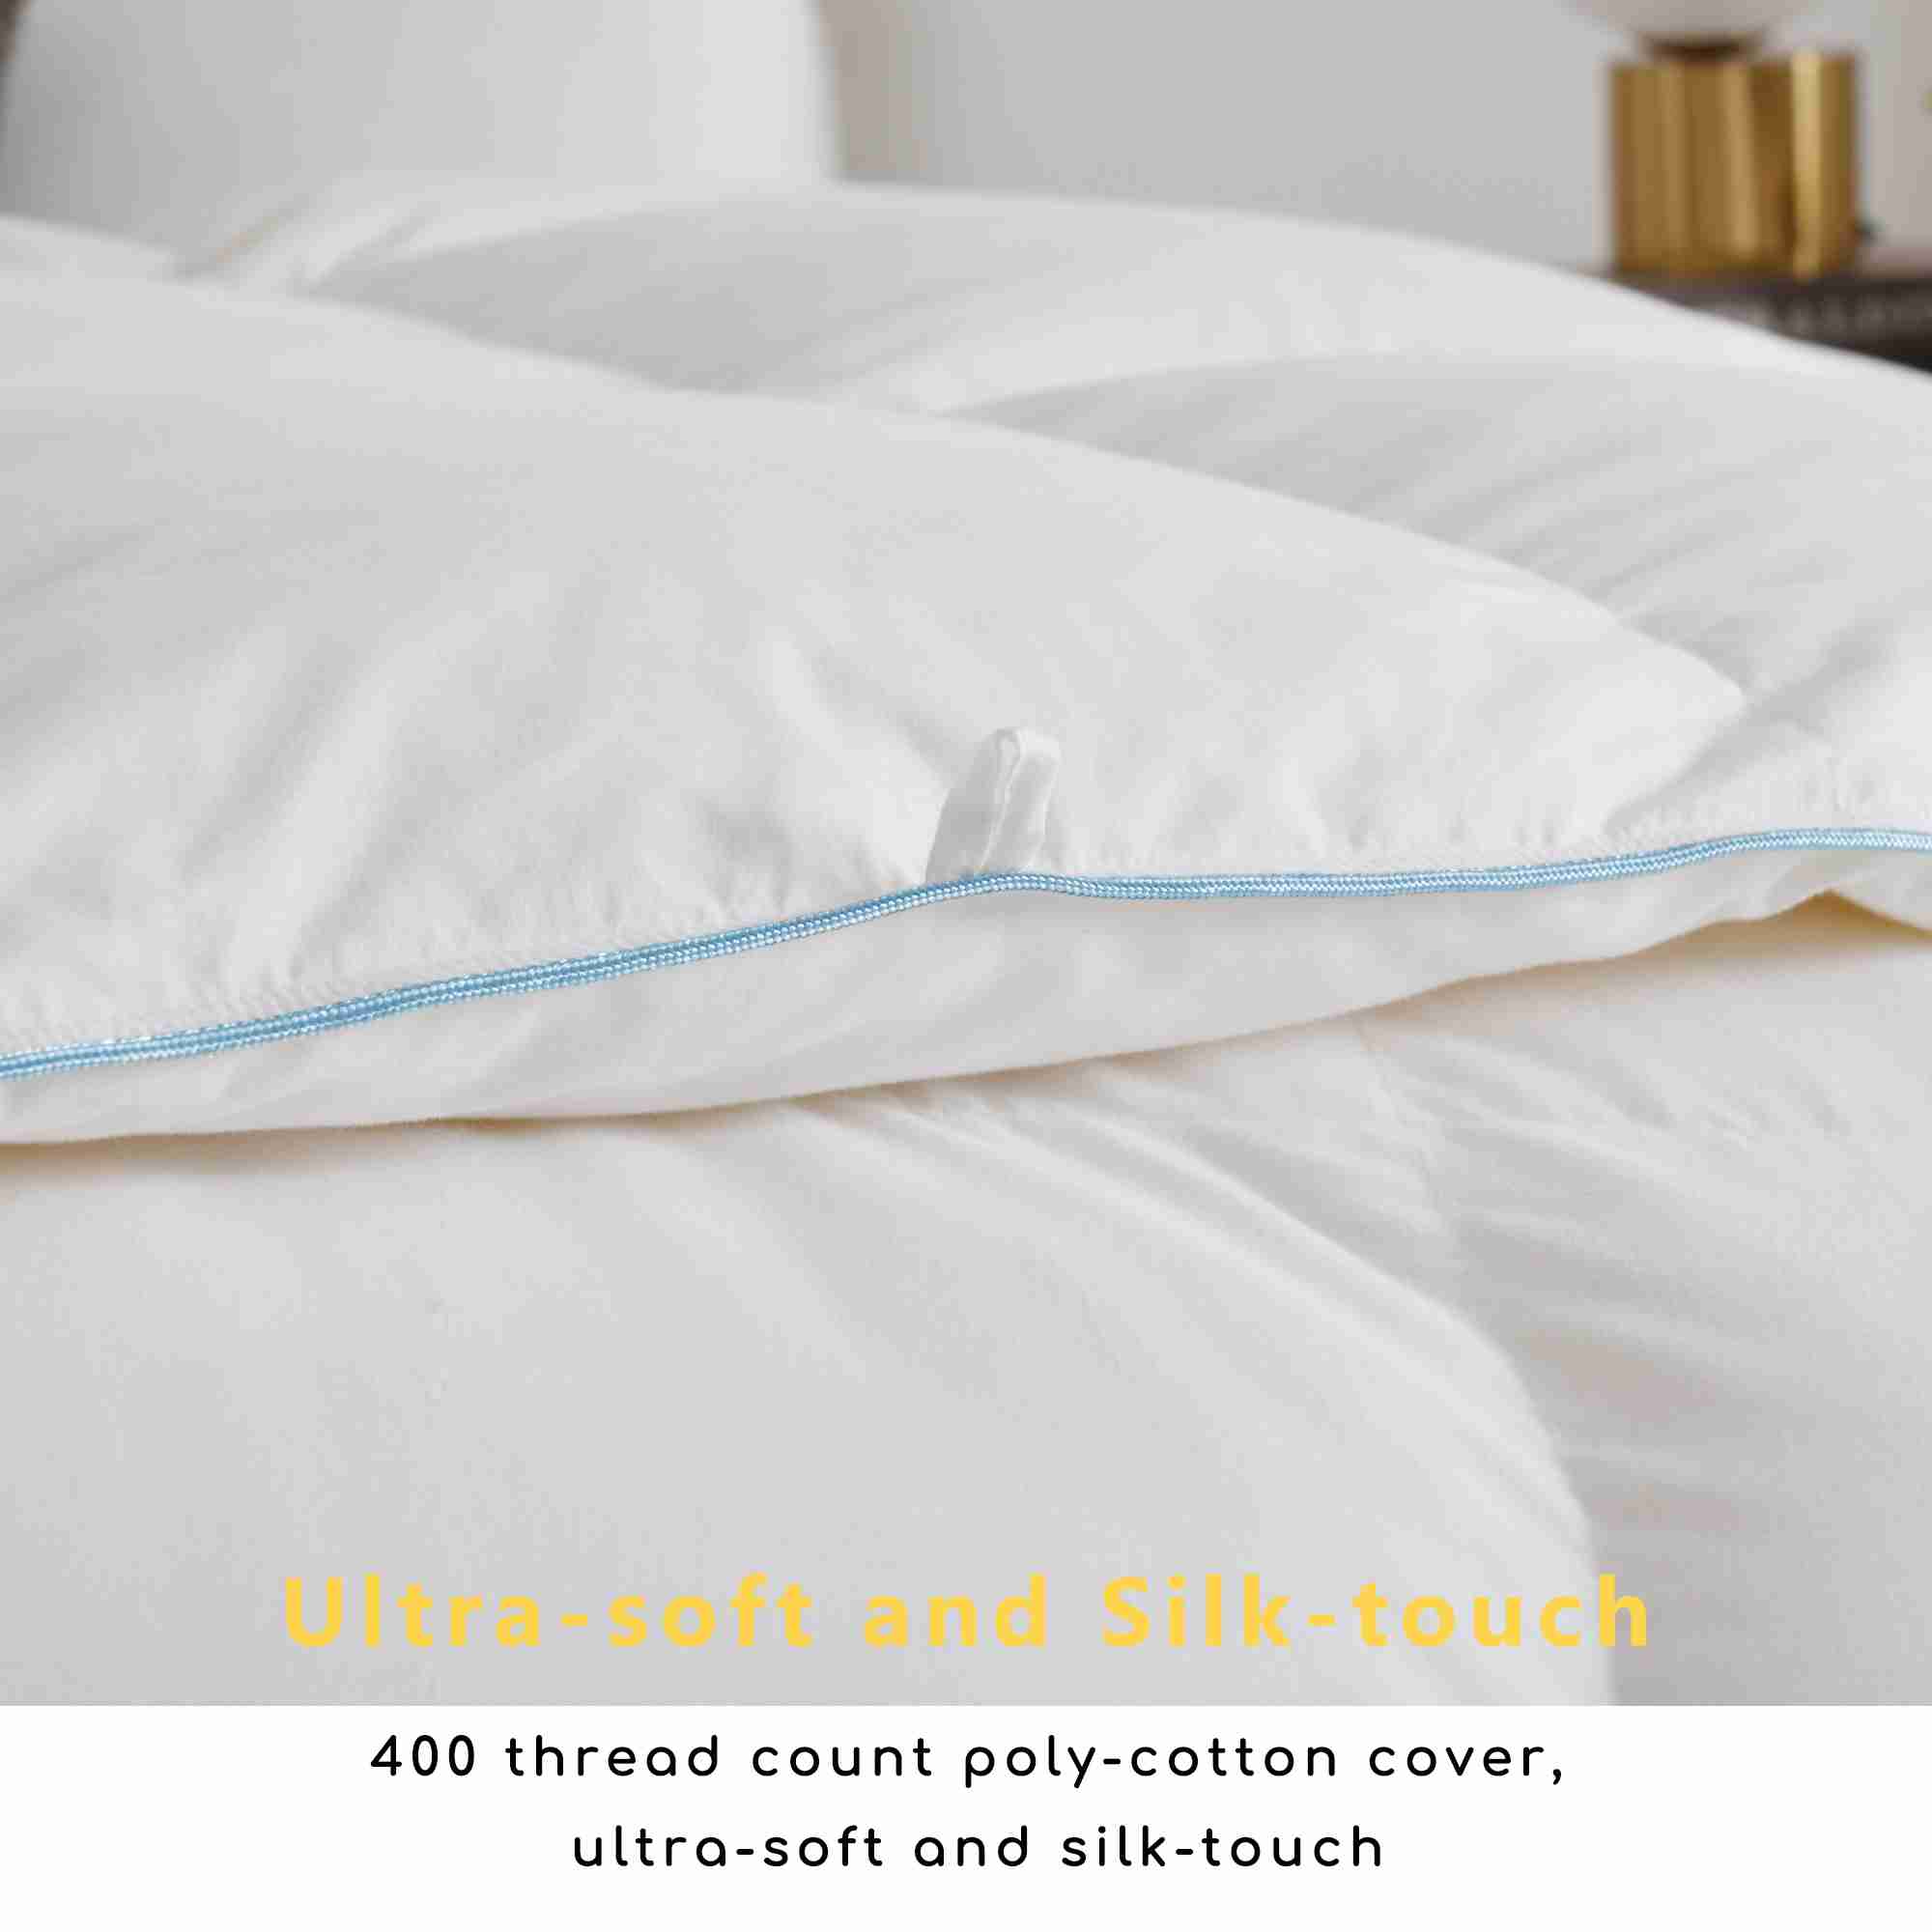 down-comforter-king-size-hotel-collection-cozy-soft with discount code